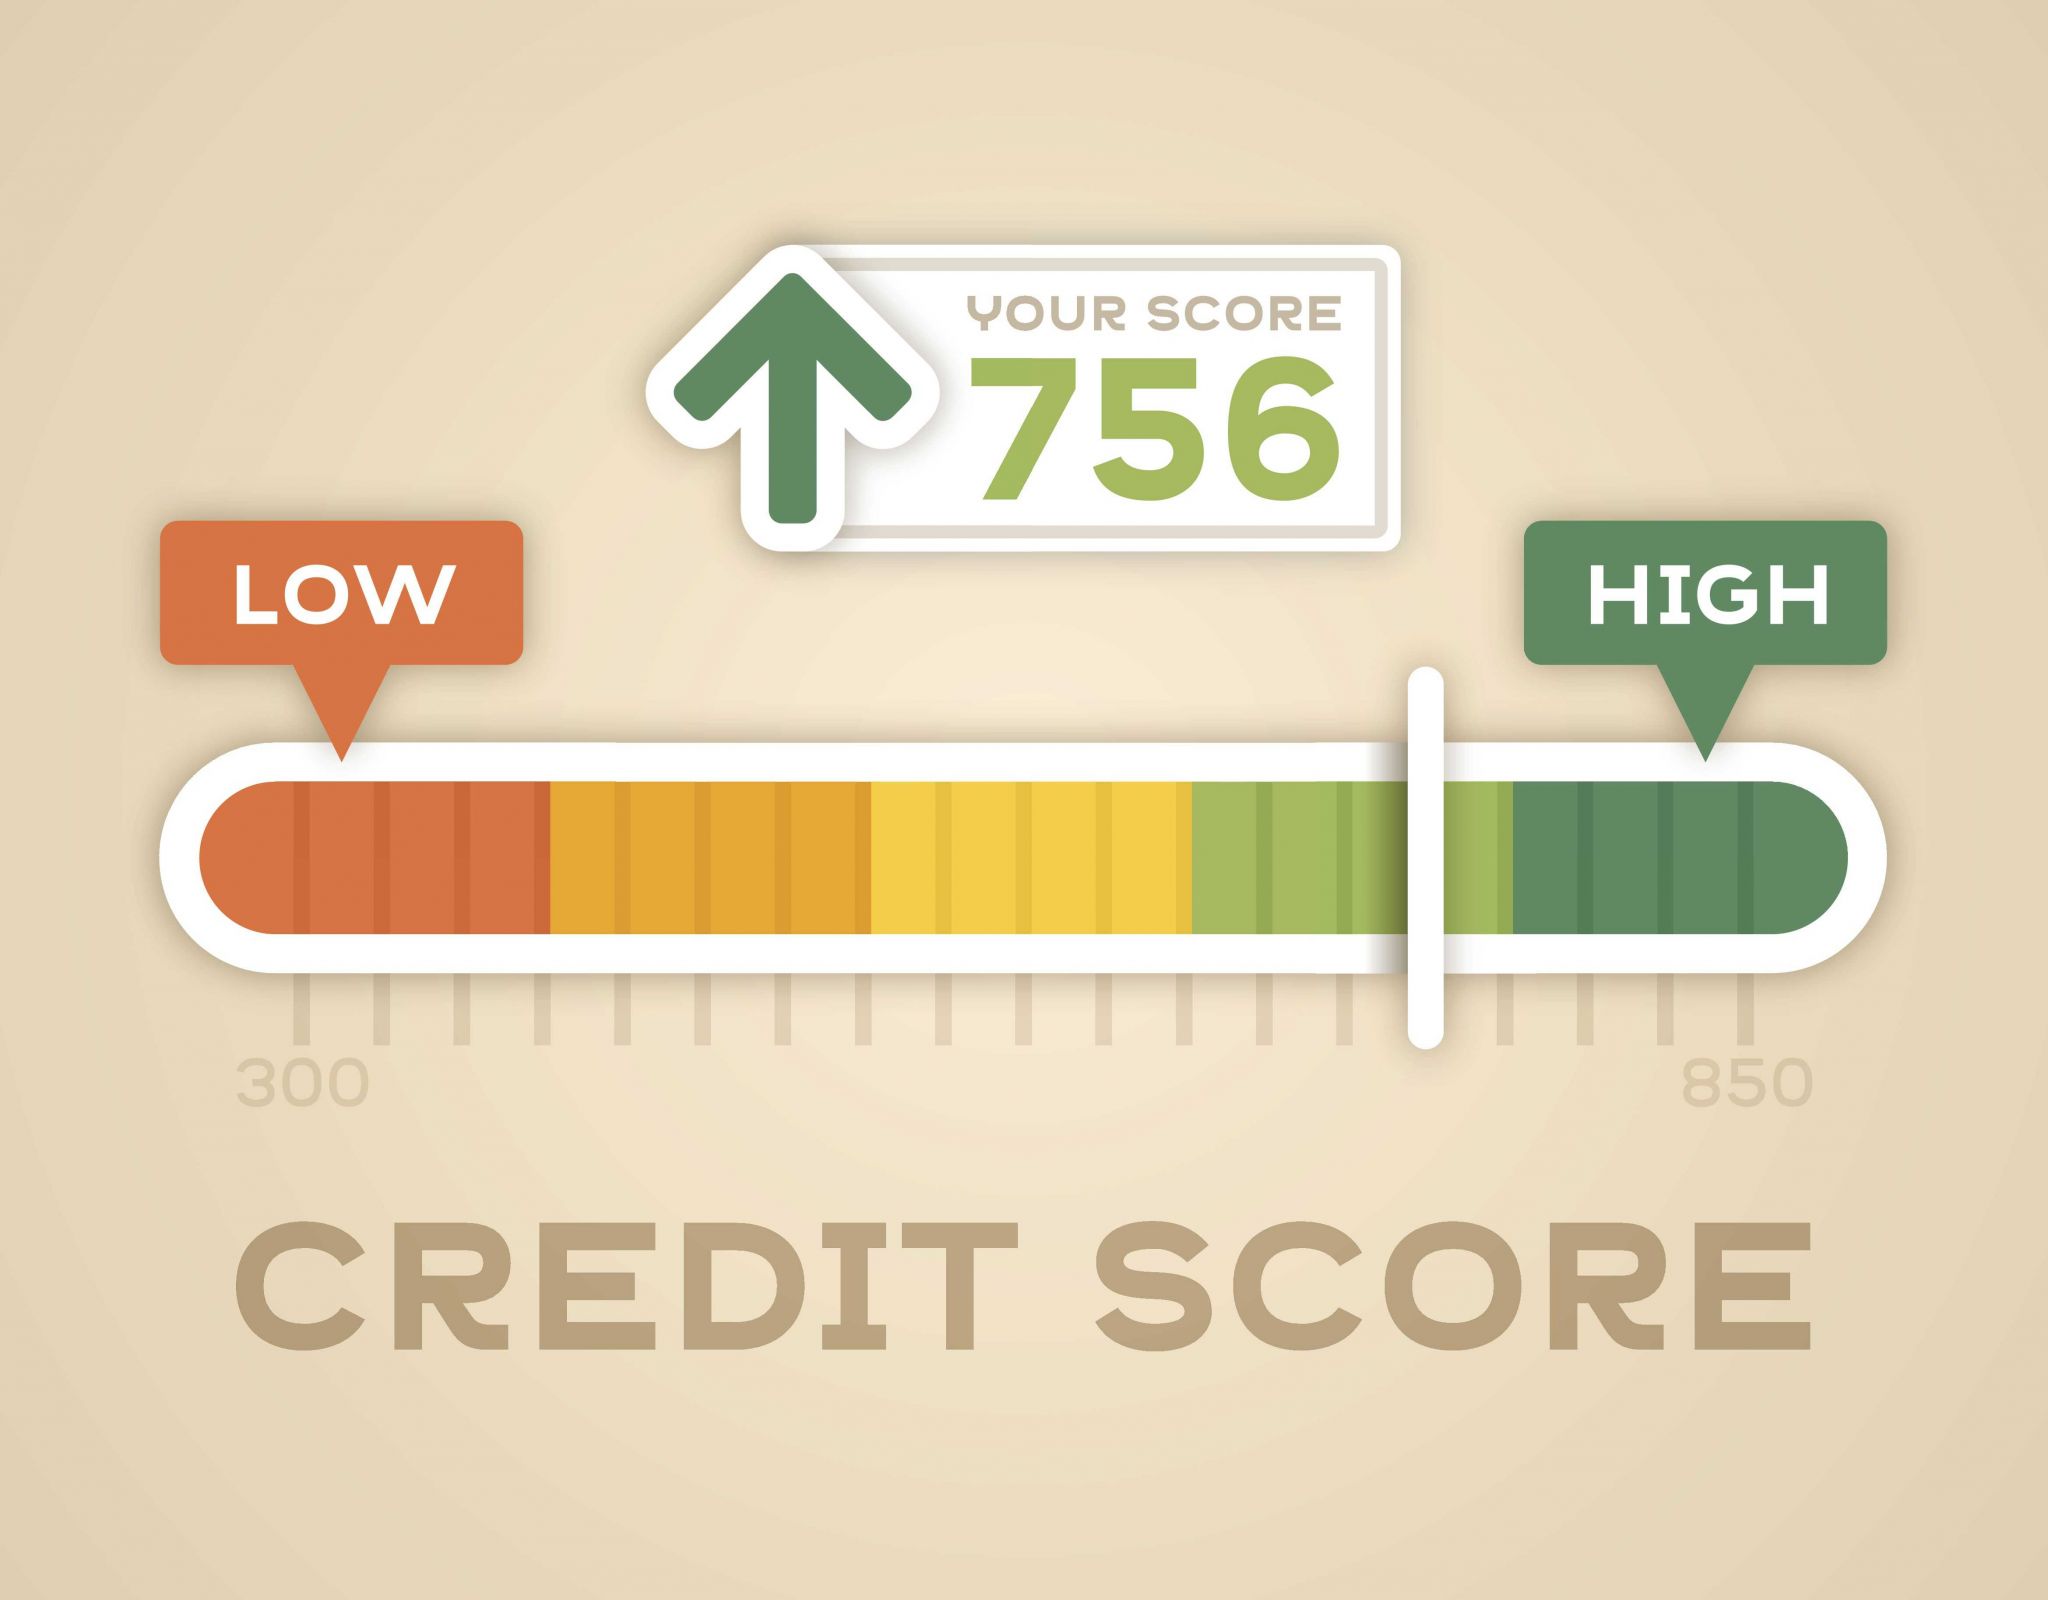 Shopping for A Credit Card Worksheet Answers Along with How Credit Scores Work